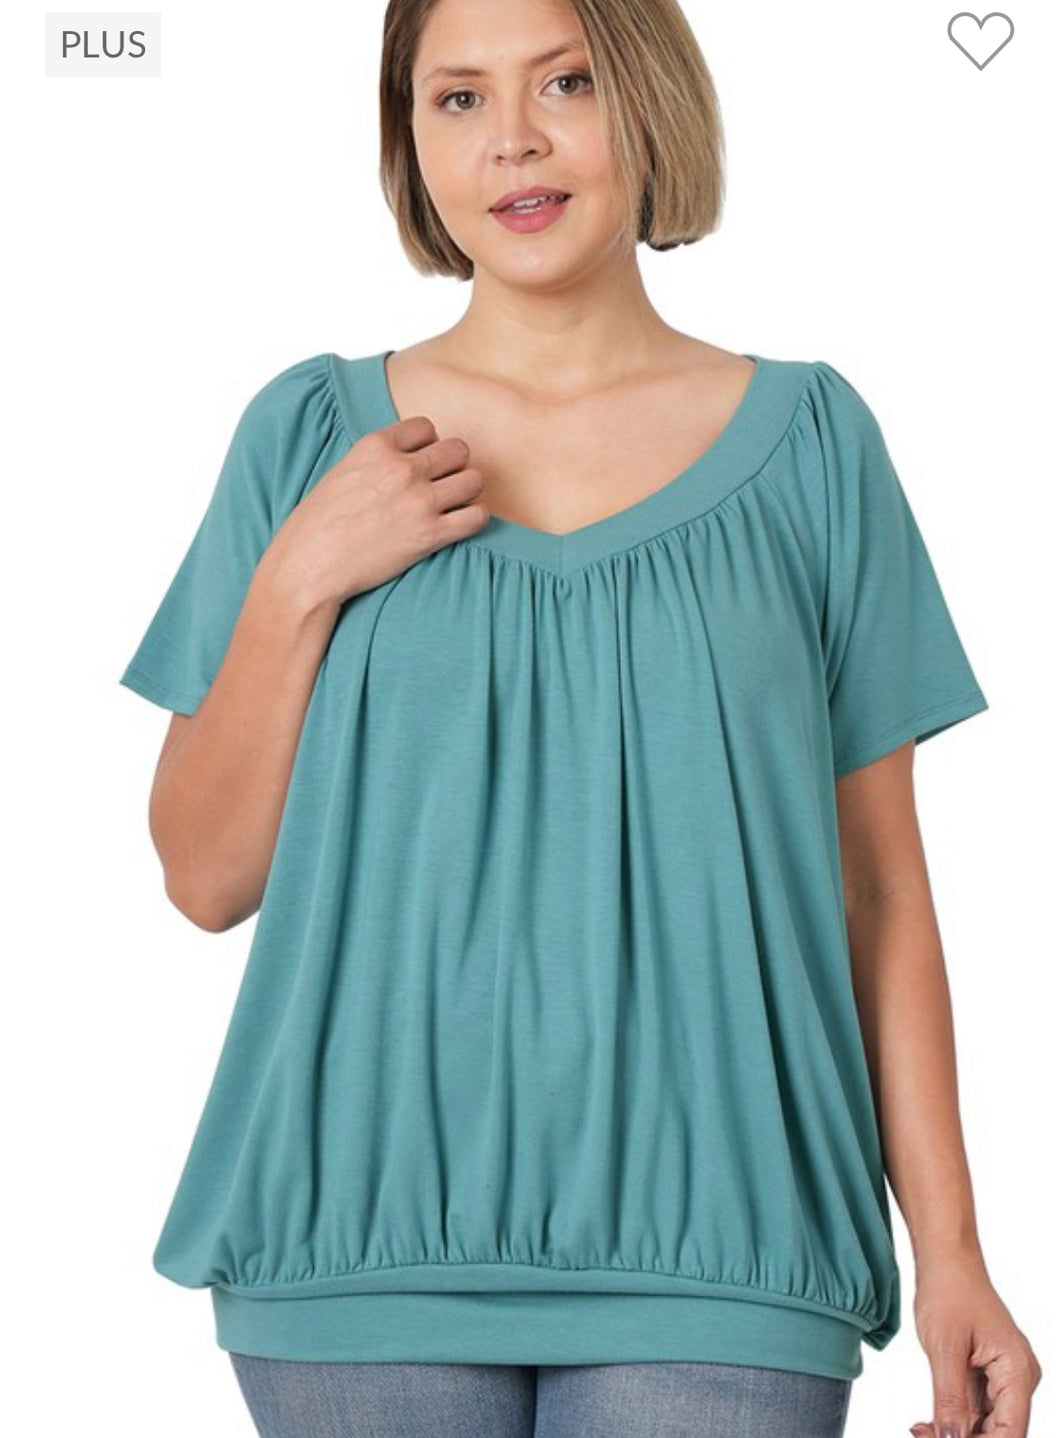 Dusty Teal Plus Size V-Neck Short Sleeve Top